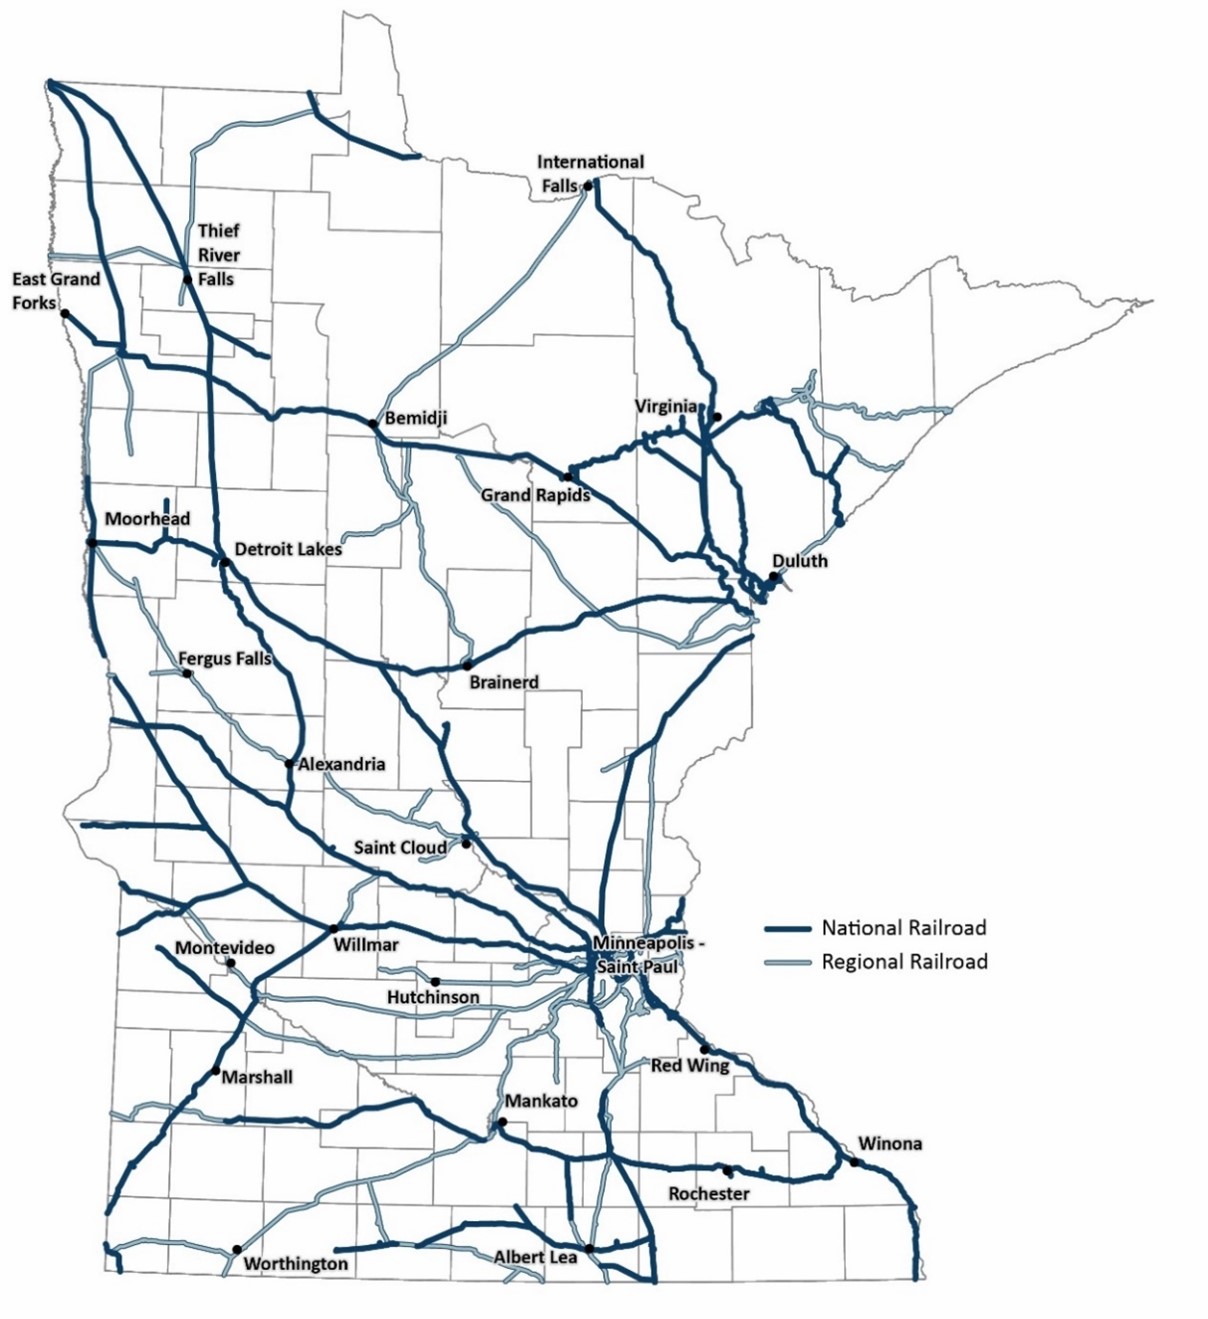 Chart shows the mix of commodities that are originated on Minnesota’s freight rail network. 48% of commodities on the rail network are iron ore/taconite, 19% falls into an other category, 15% are farm products including grain, 8% are food products, 6% are nonmetallic minerals and 4% of commodities are chemicals. 